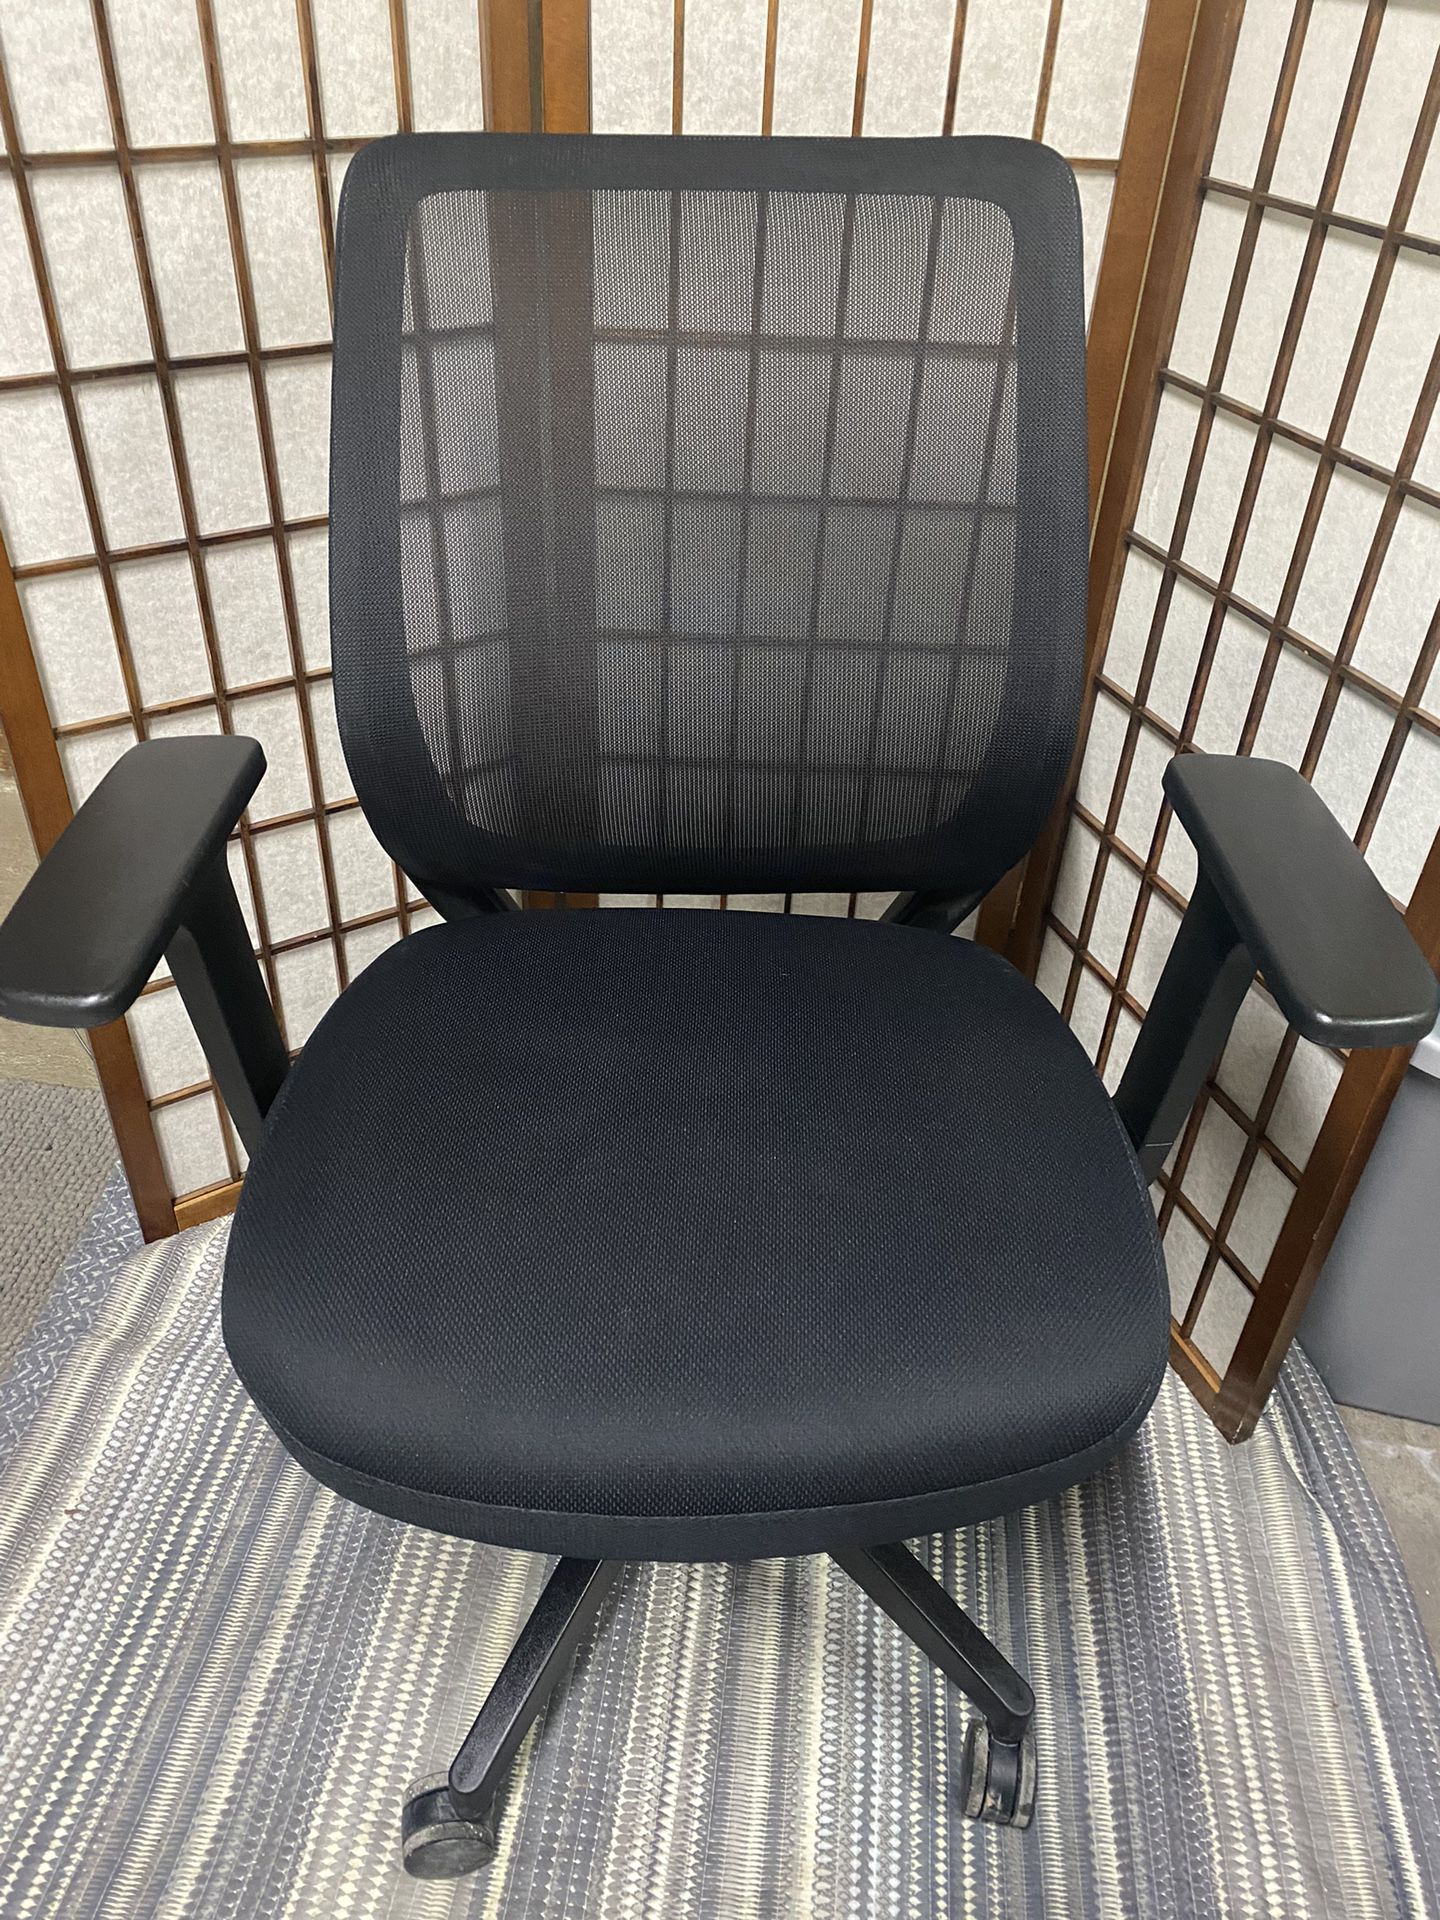 Office Chair Swing Ajustable 